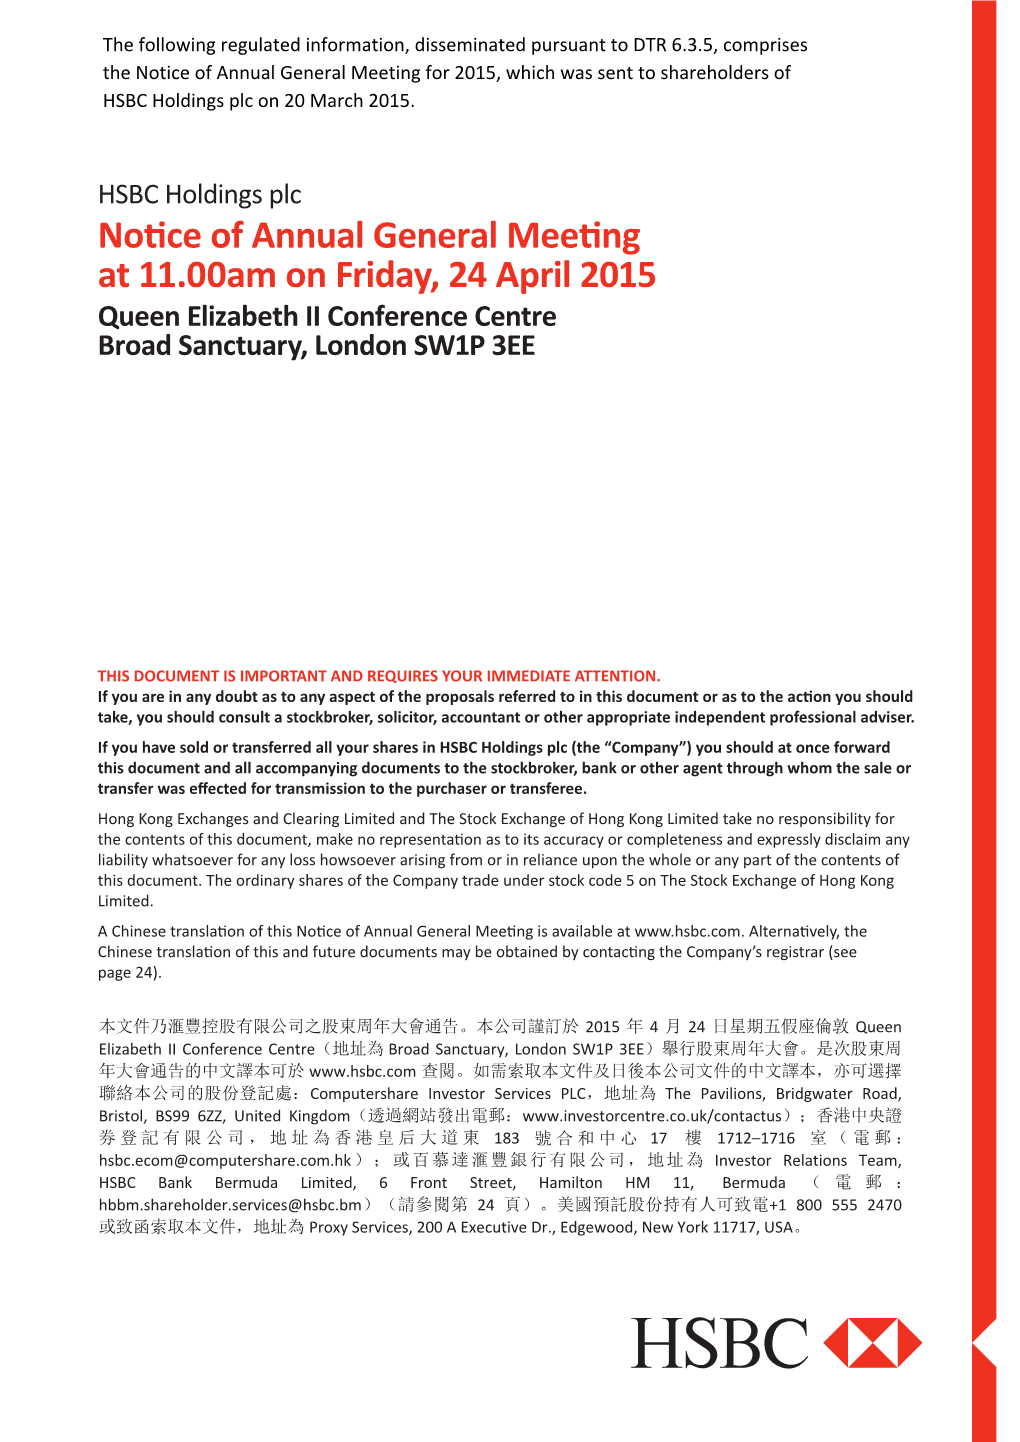 Notice of Annual General Meeting at 11.00Am on Friday, 24 April 2015 Queen Elizabeth II Conference Centre Broad Sanctuary, London SW1P 3EE